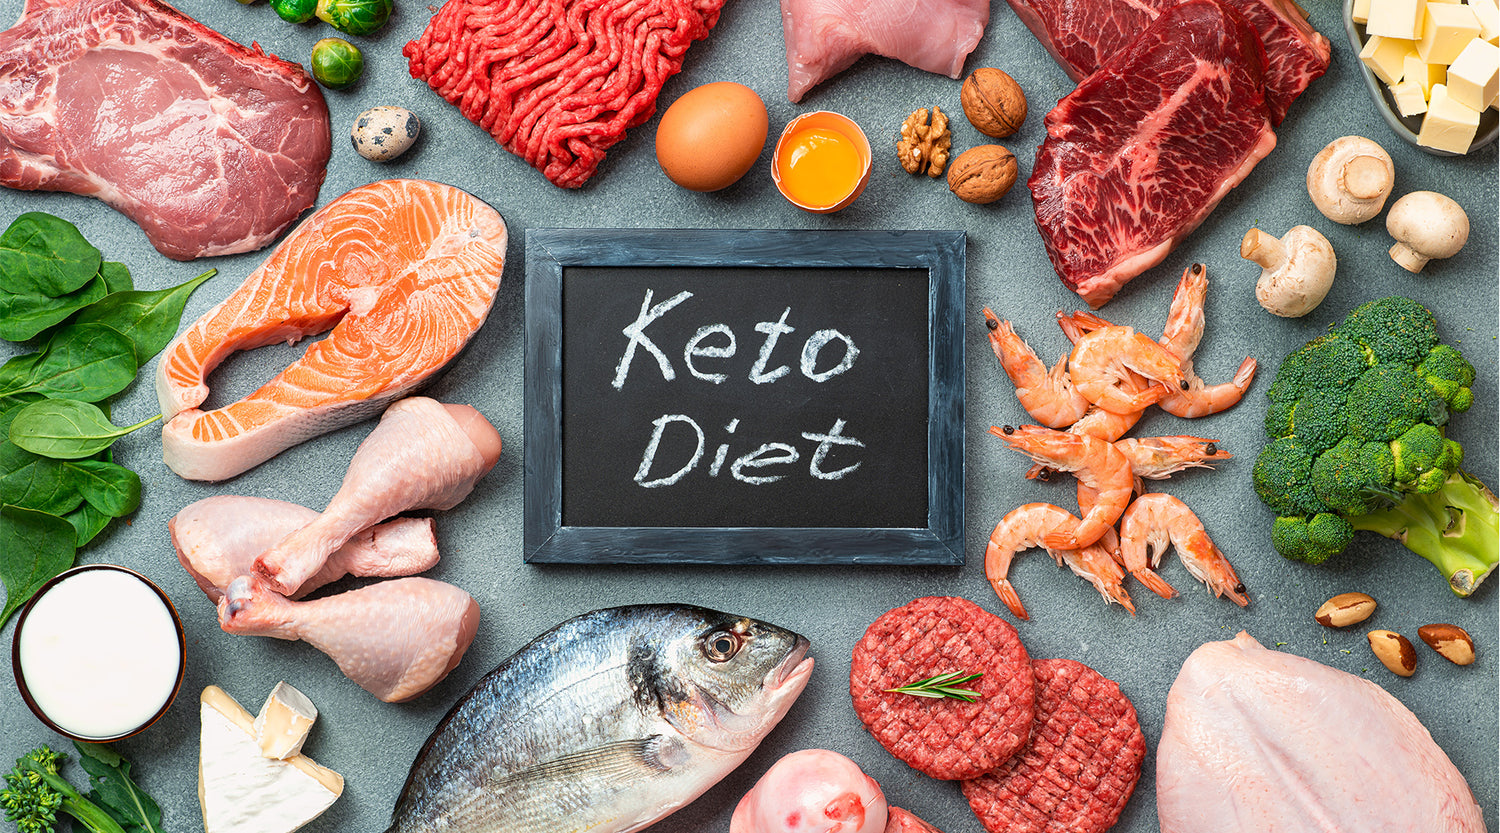 GOING KETO? HERE'S WHAT NUTRIENTS YOU’LL NEED